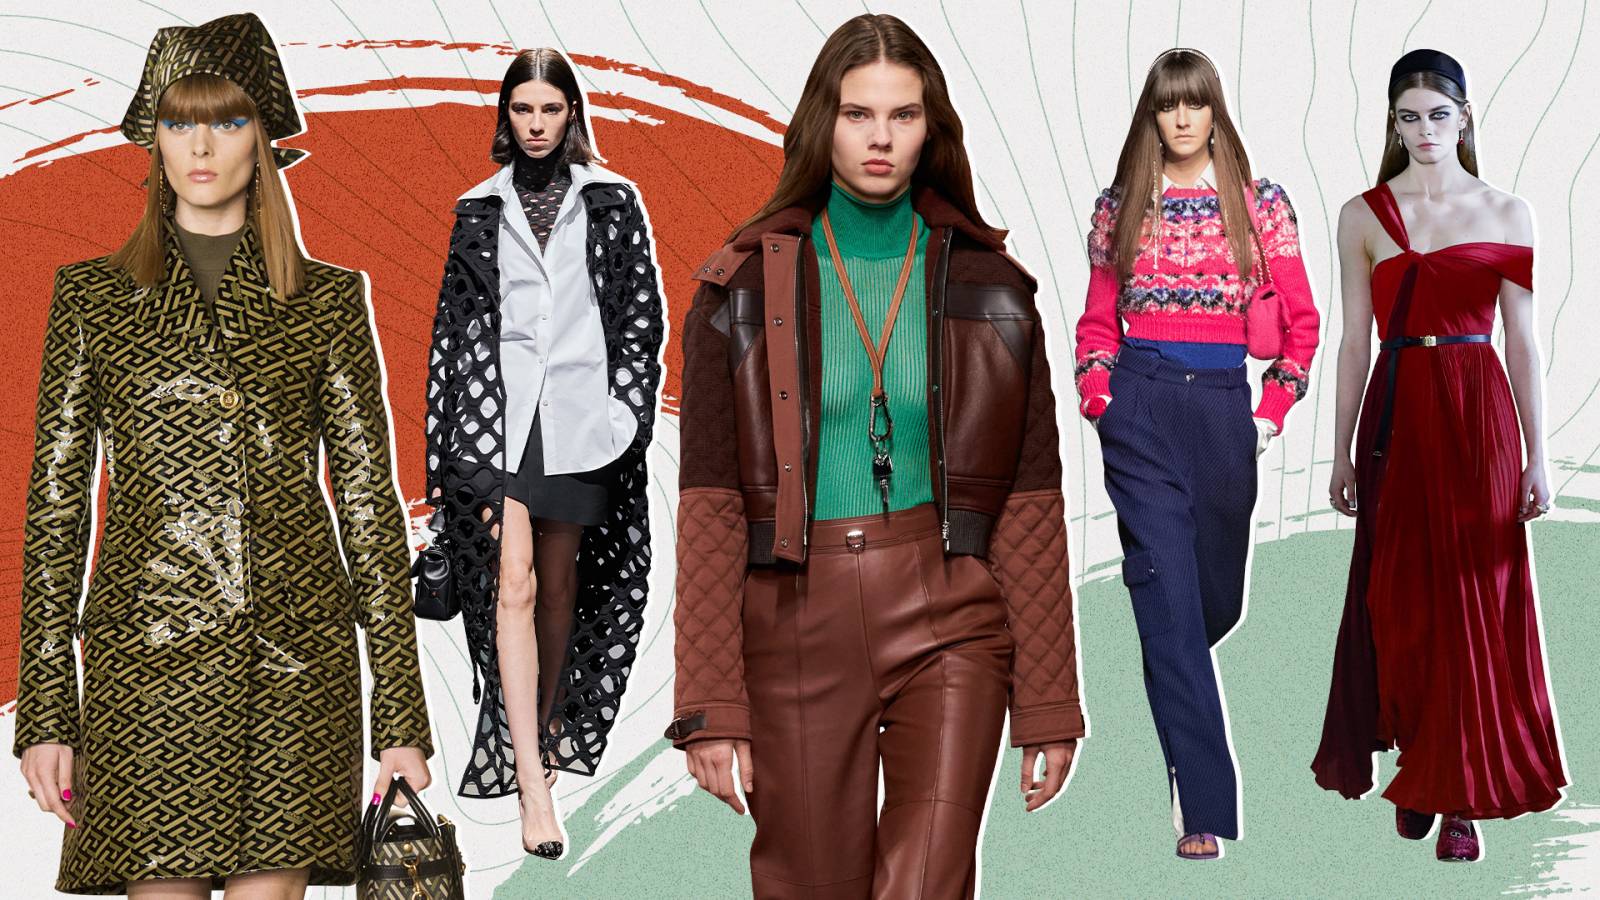 The Biggest Fashion Trends That Will Dominate in 2022